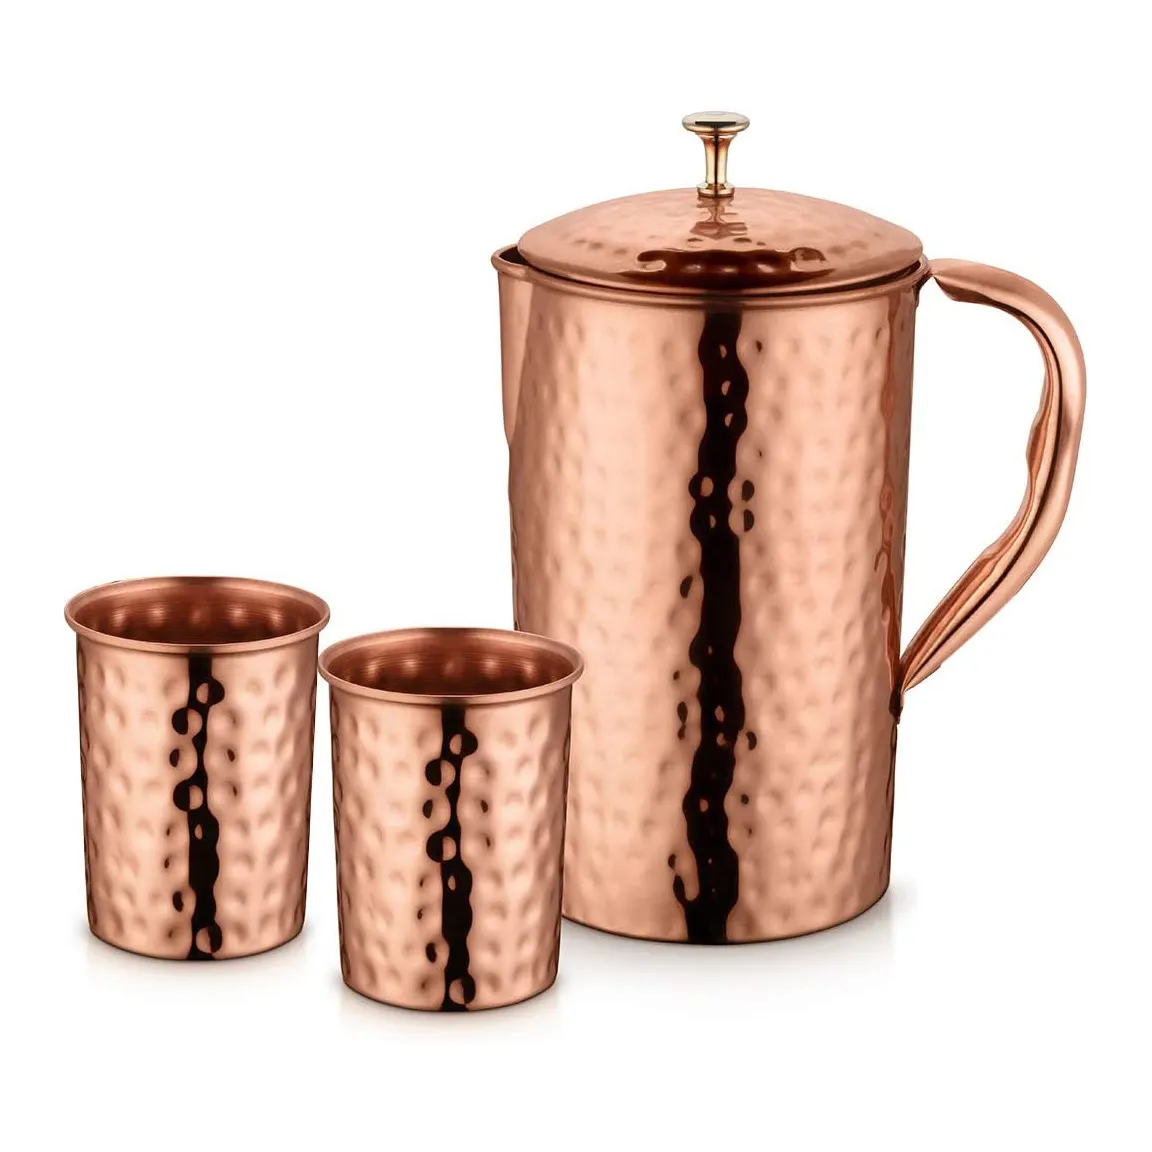 High Selling Copper Pitcher Authentic Copper Jug Metal Pure for Drinking Copper Water Jugs Hammered Engraved & Plain Customized